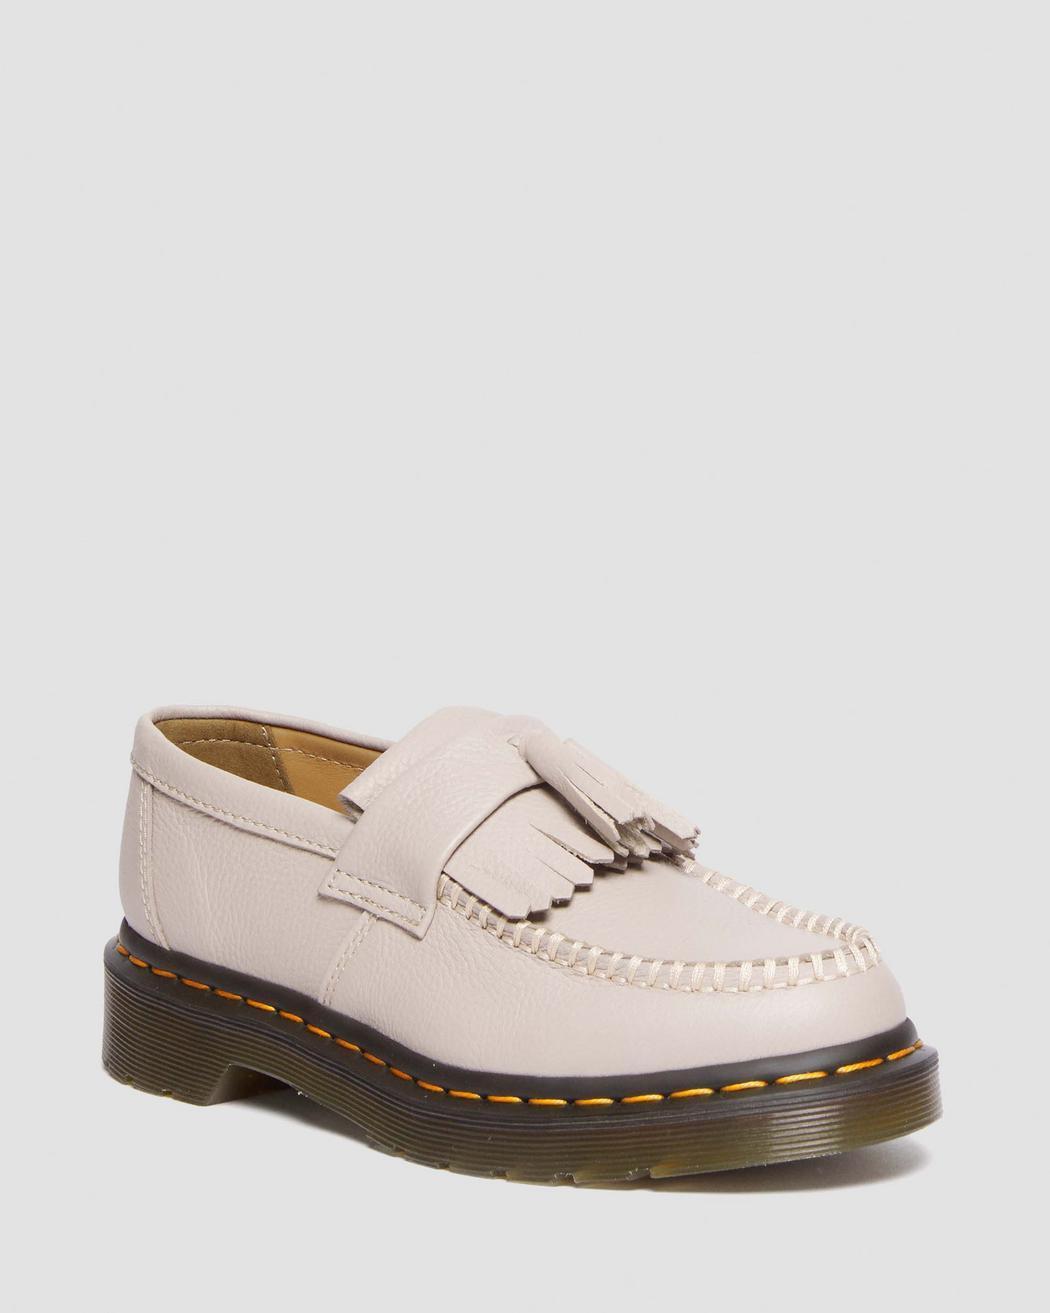 Dr Martens Women's Adrian Vintage Virginia Leather Loafers Product Image